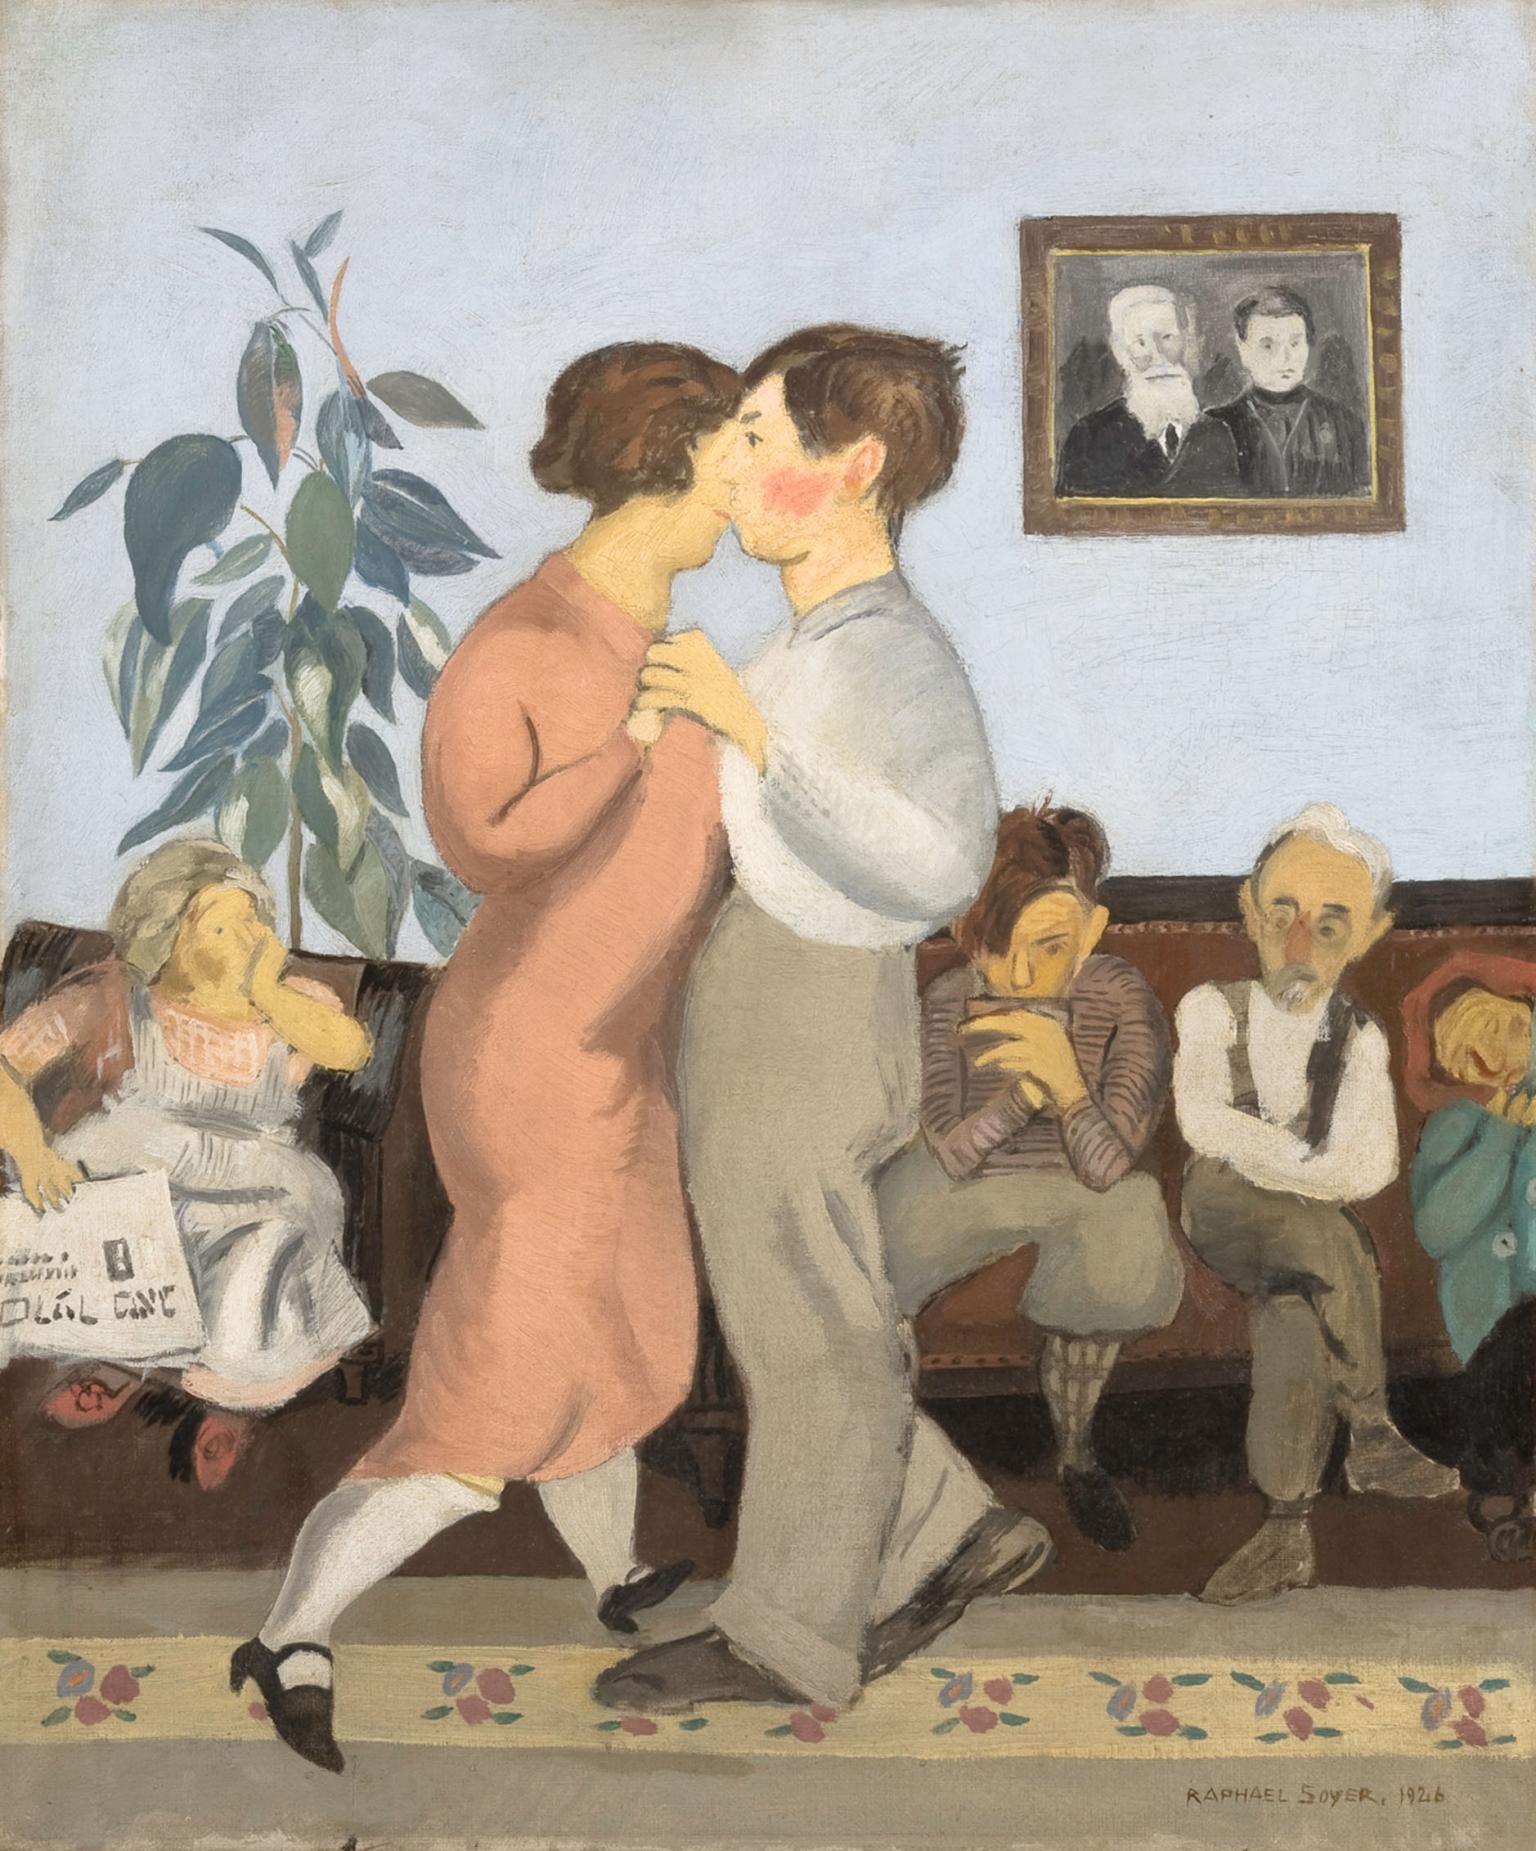 Painting of man and woman dancing to the accompaniment of a harmonica player, with people watching from sofa.